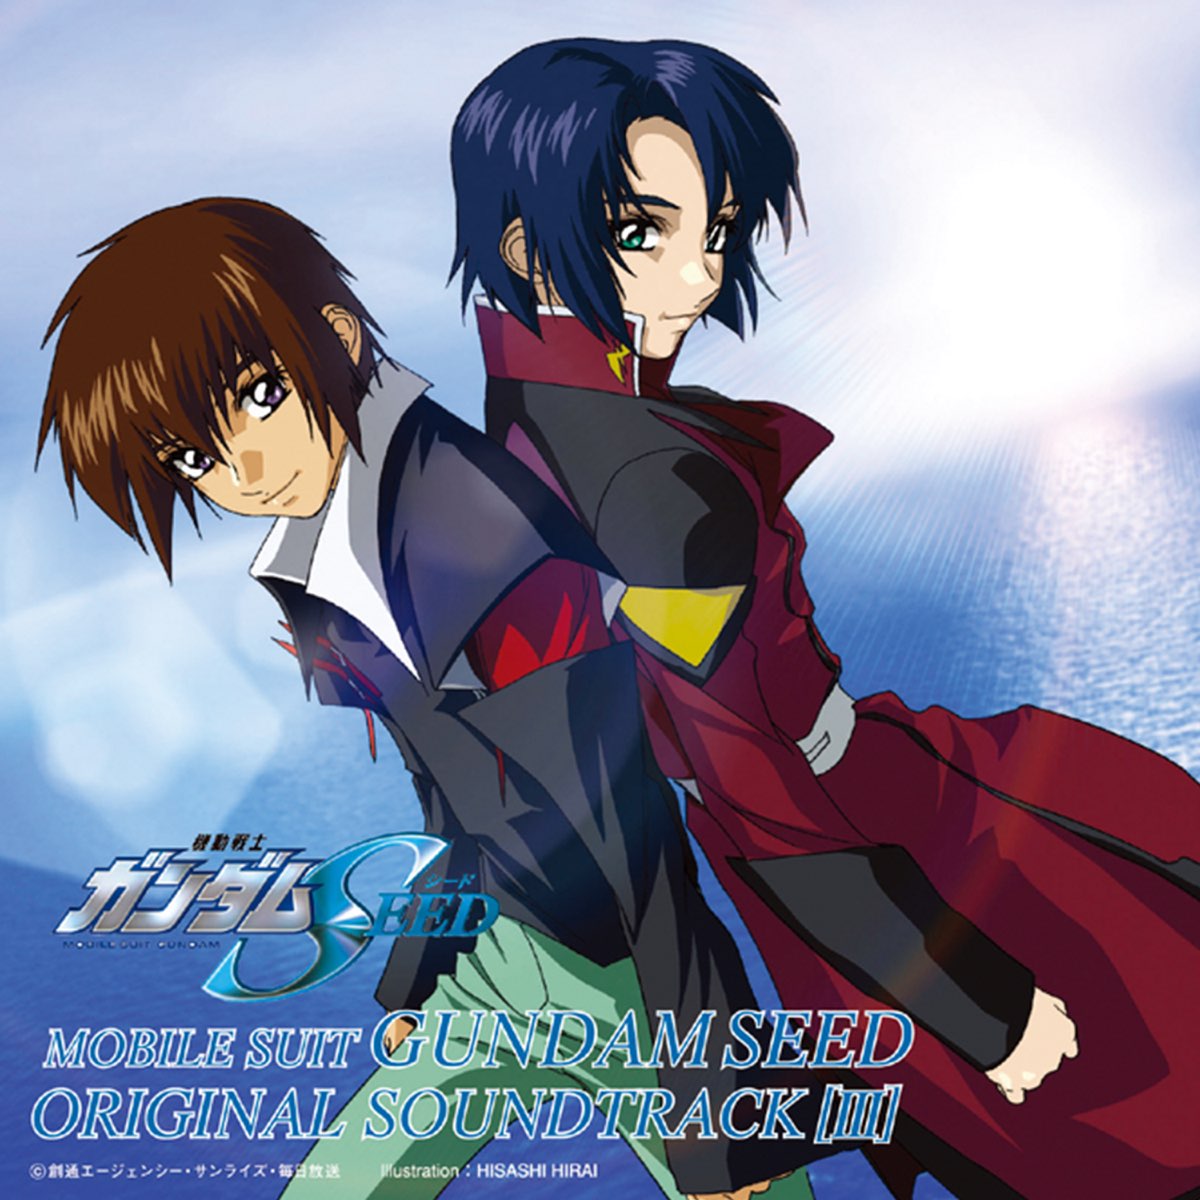 MOBILE SUIT GUNDAM SEED Original Motion Picture Soundtrack 3 by See-Saw &  Toshihiko Sahashi on Apple Music